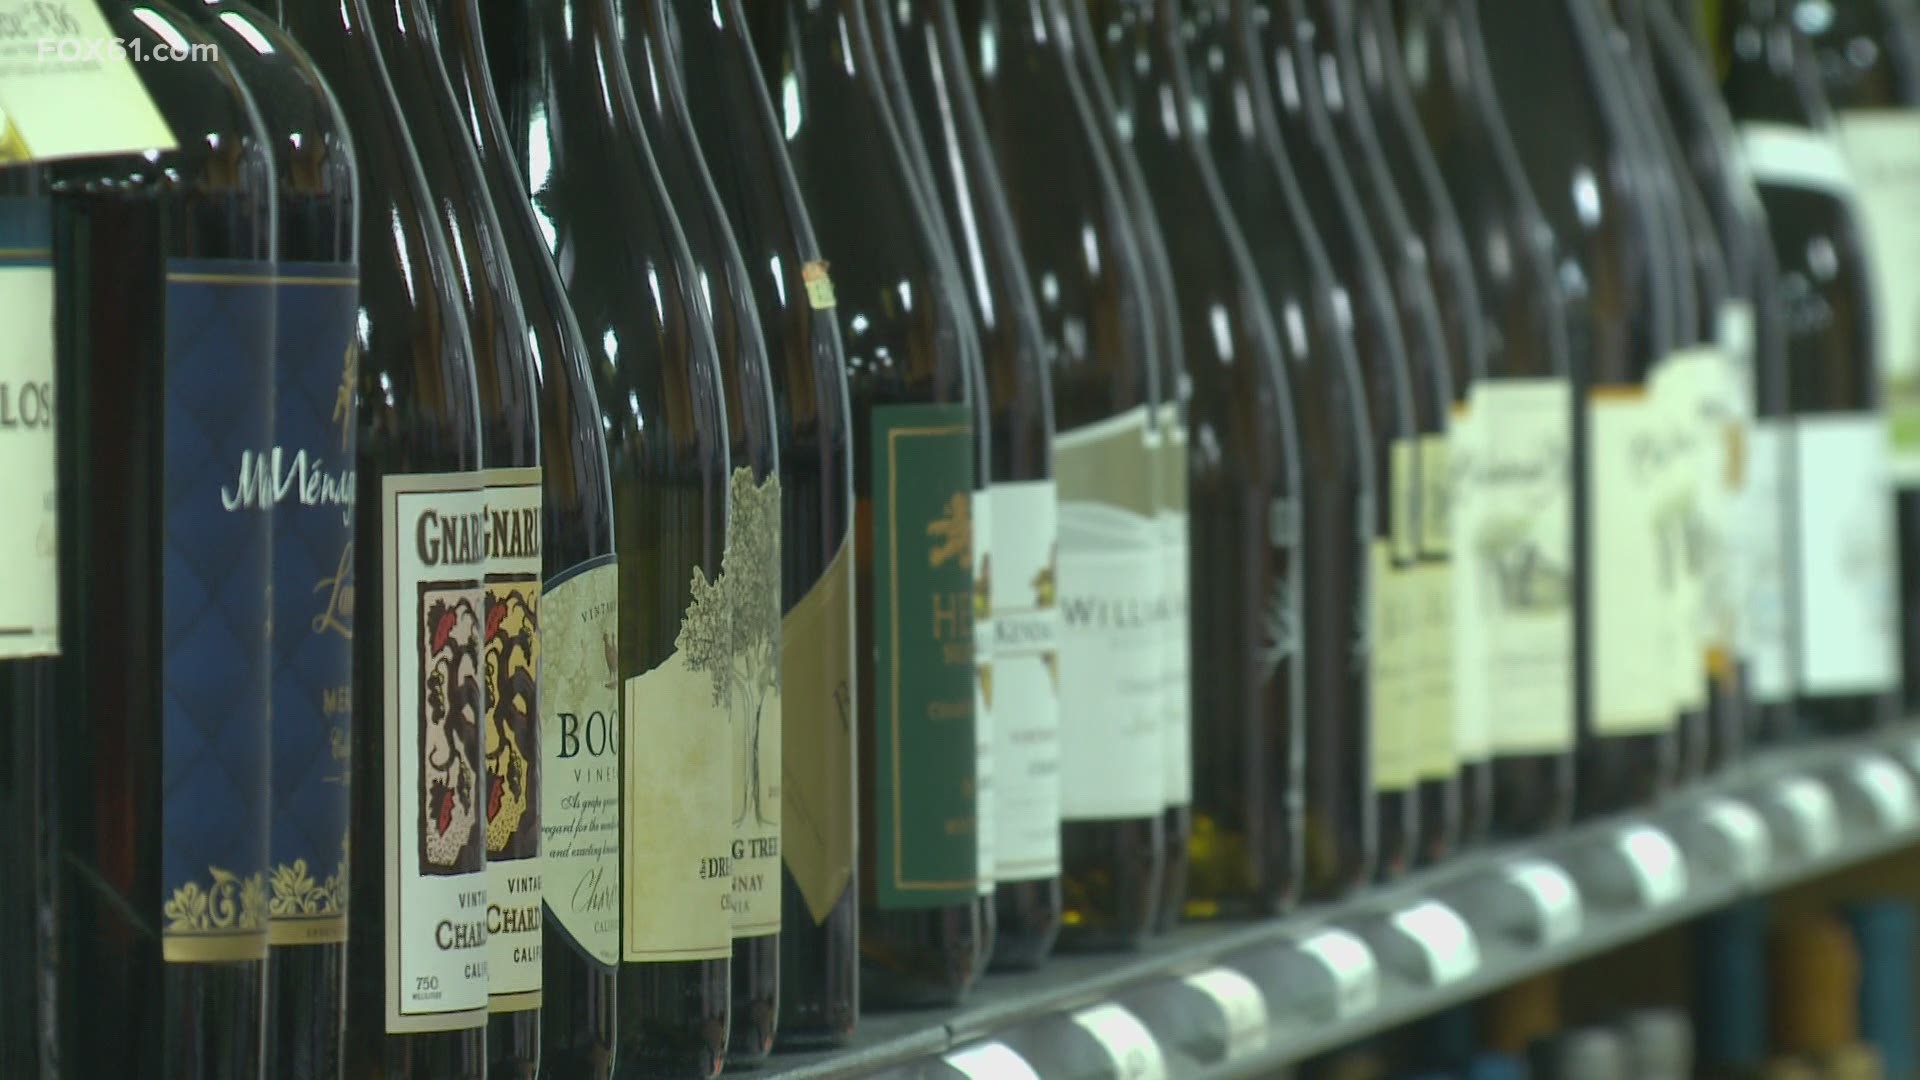 Package store owners are concerned about the potential move could cost them money